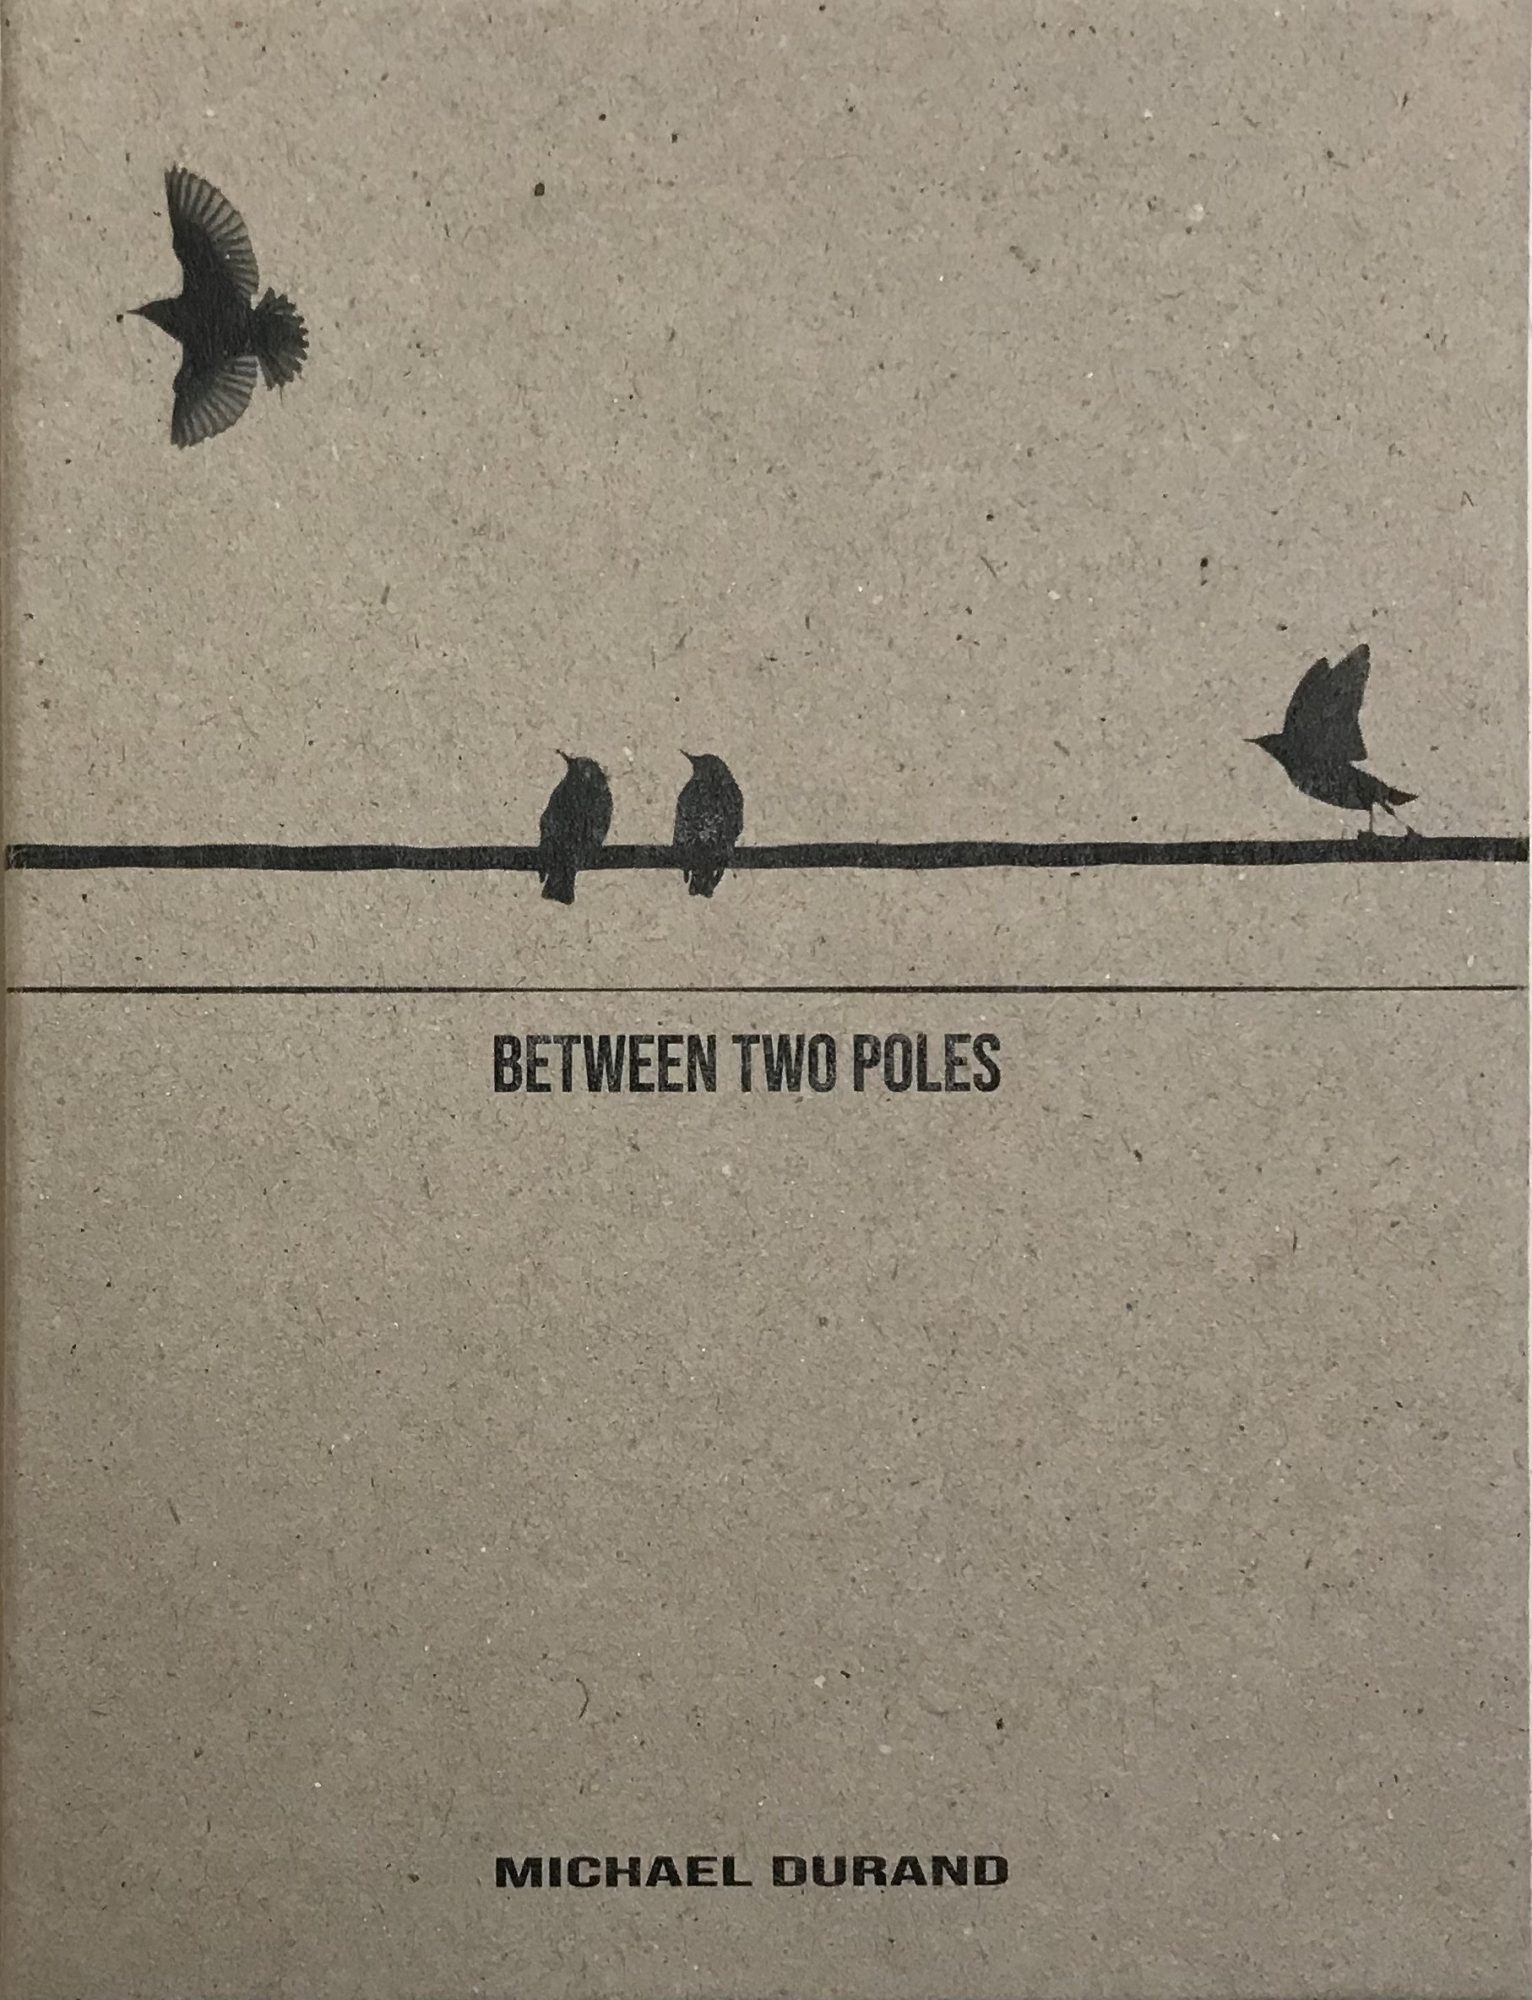 Between Two Poles, Michael Durand